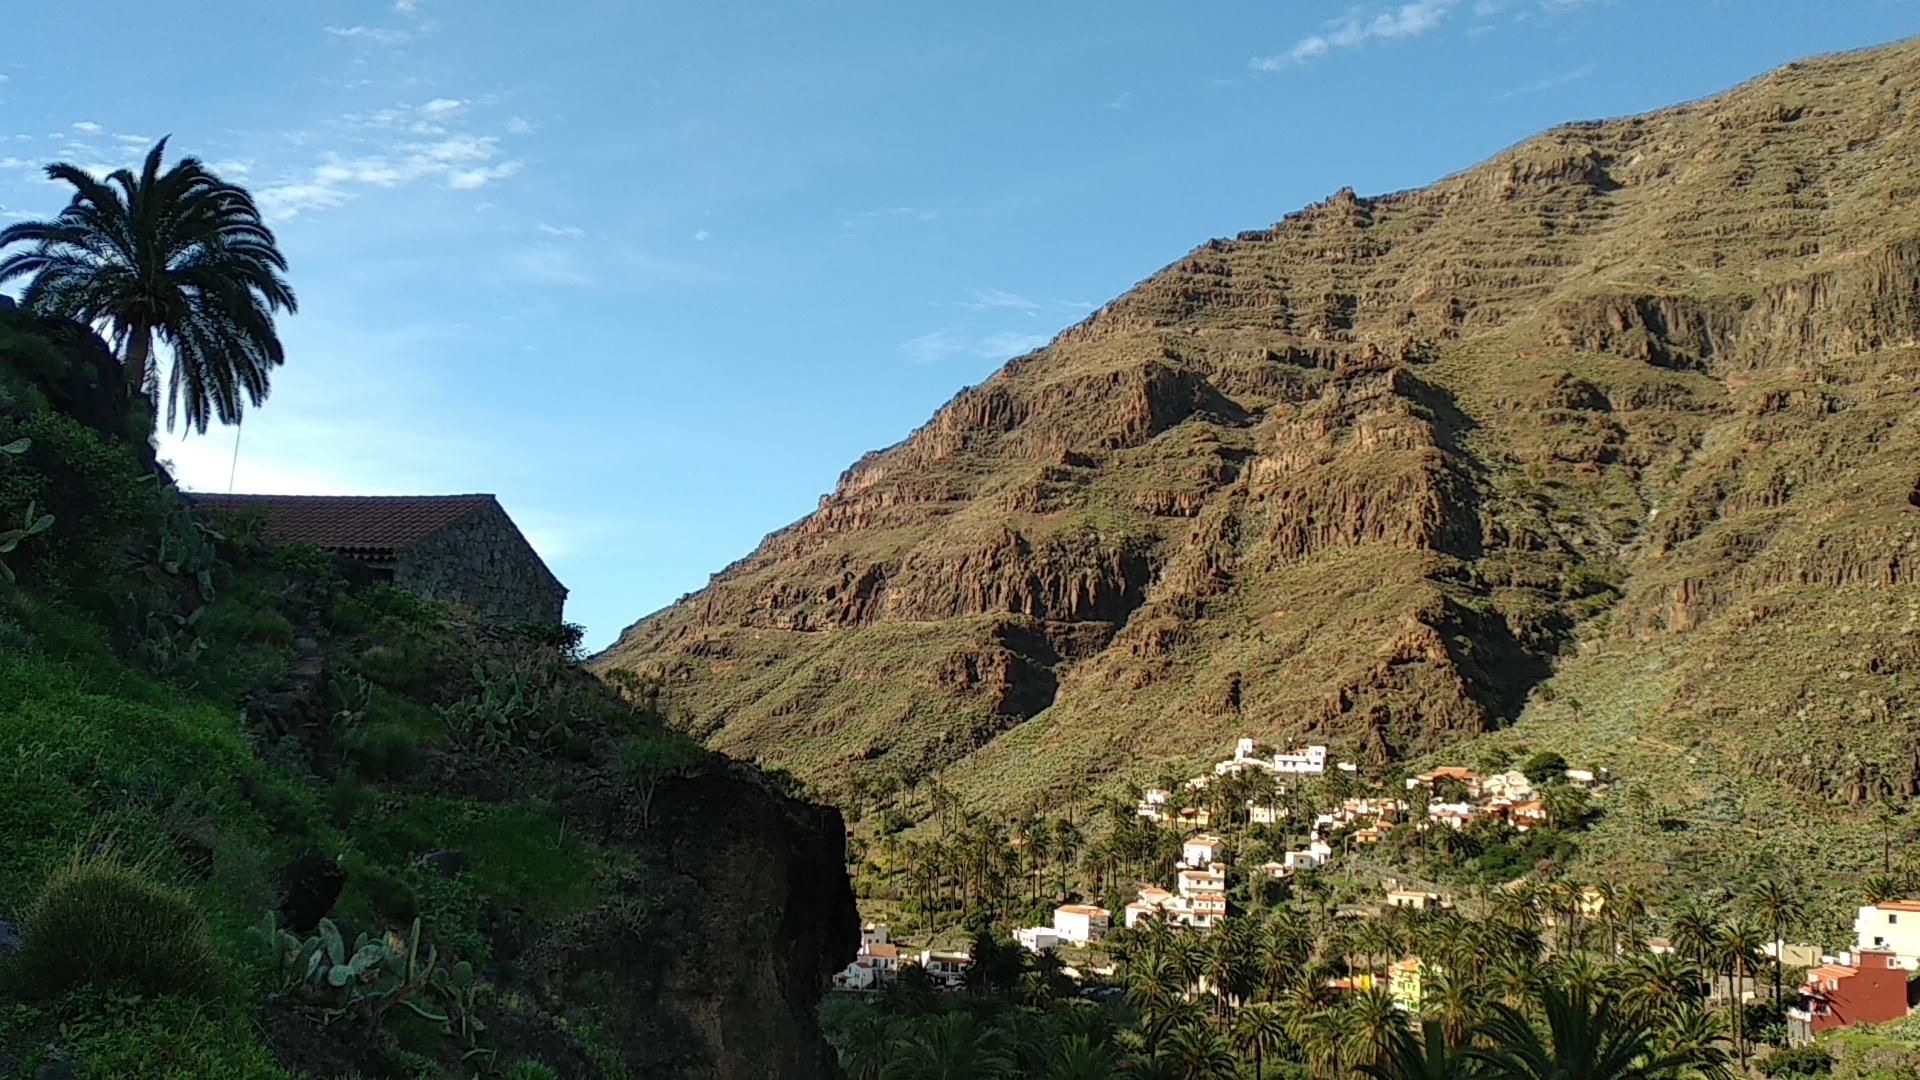 La Gomera, the greenest of the Canary Islands images/2023/gom/t1.jpg